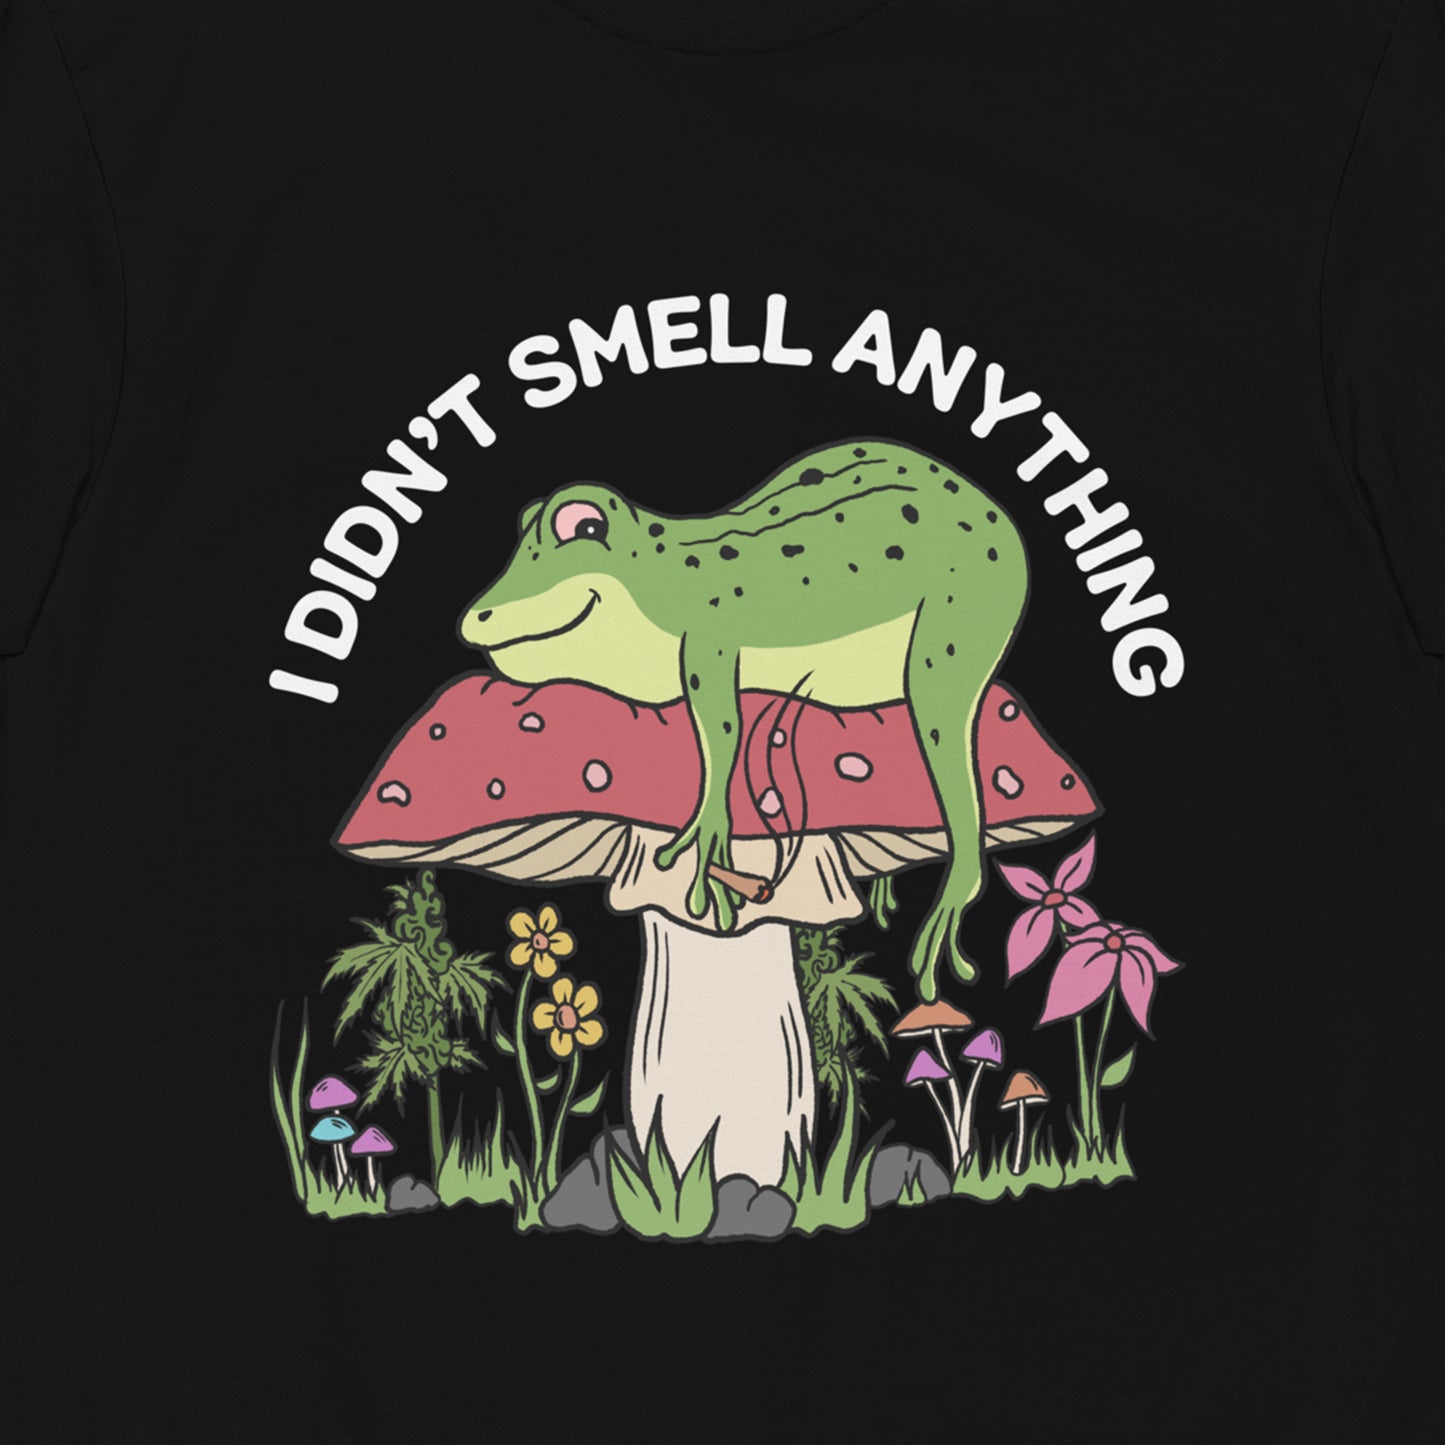 I Didn't Smell Anything Premium Graphic Tee